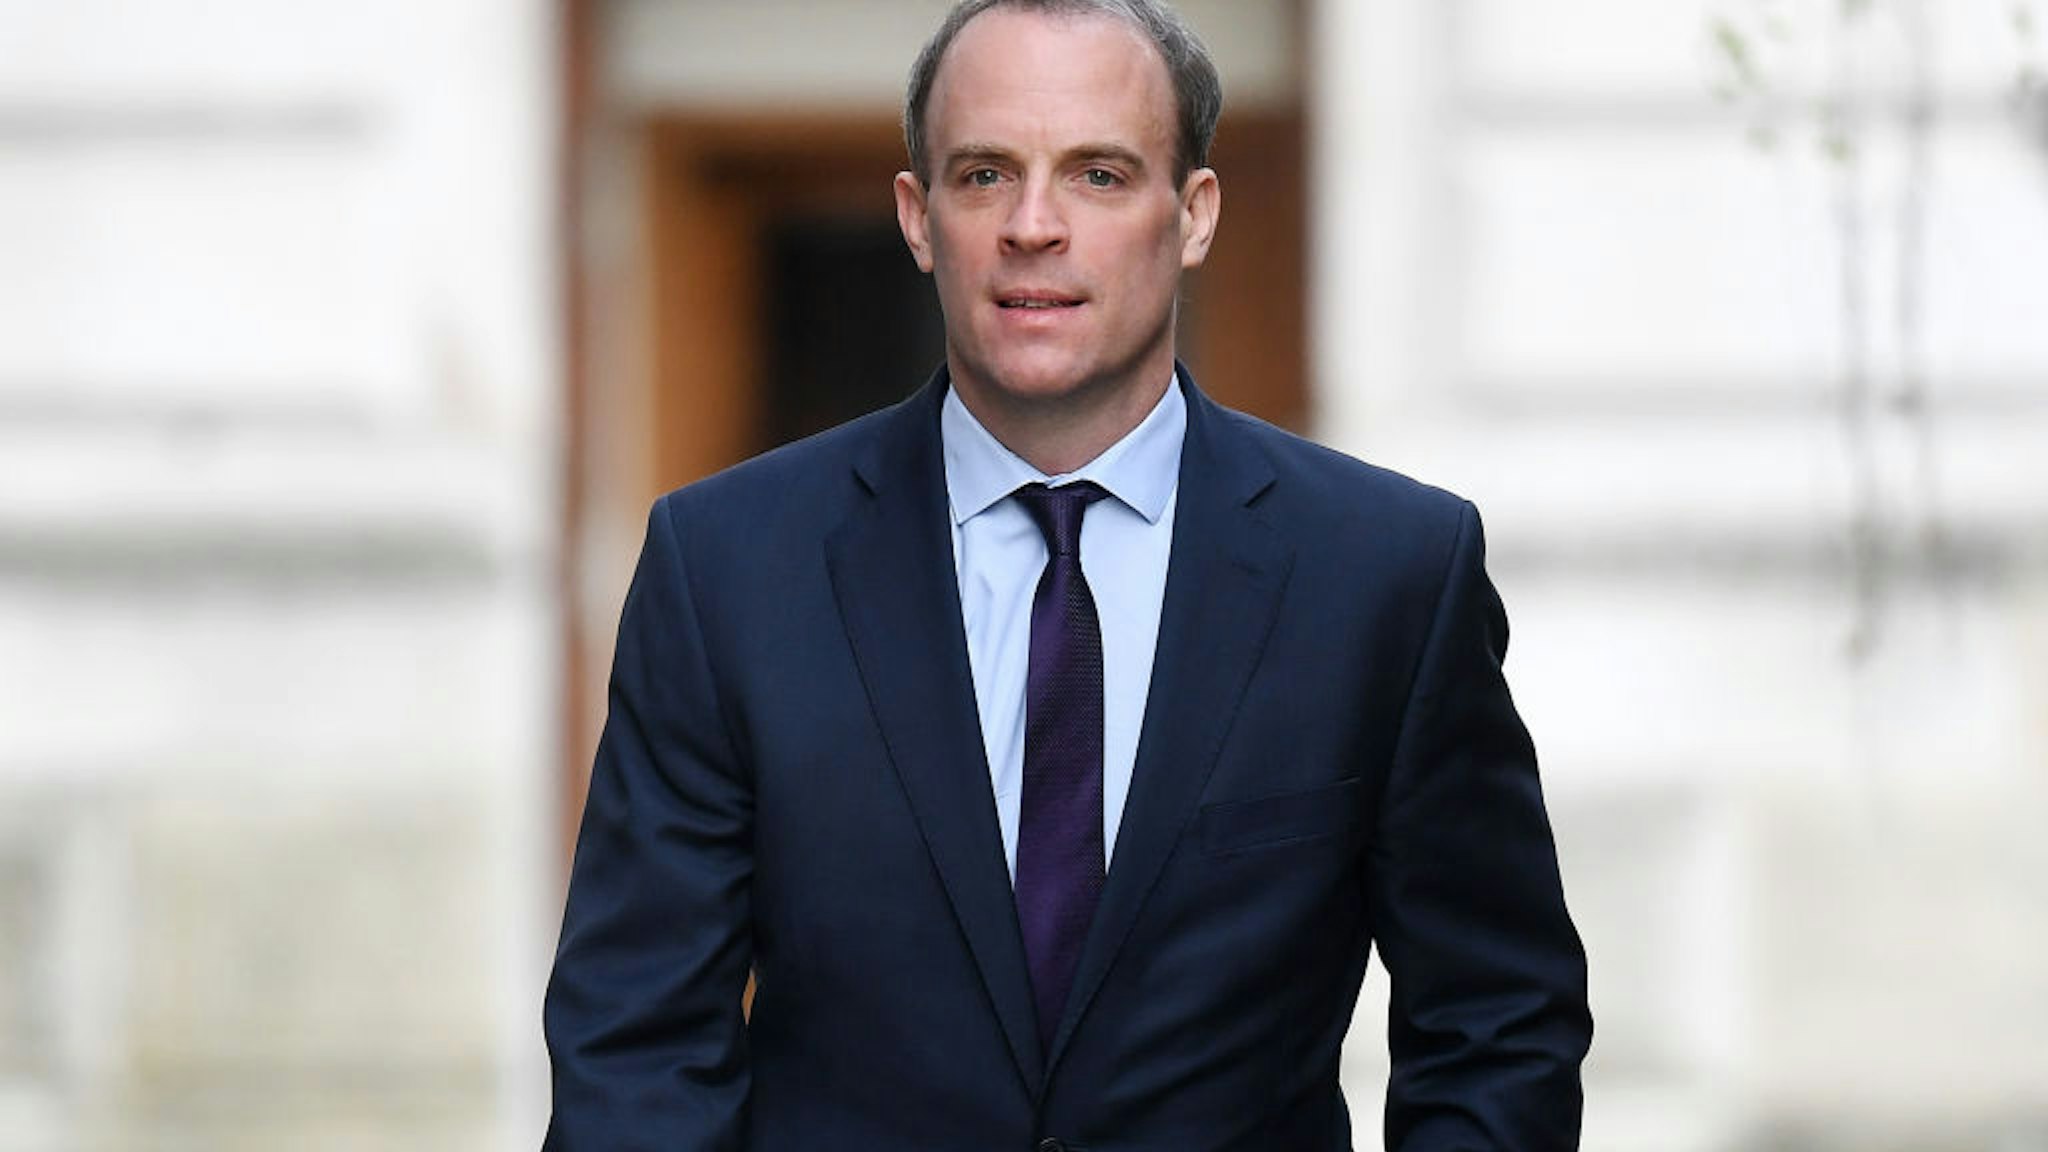 Foreign Secretary Dominic Raab arrives at 10 Downing Street for today's C-19 committee meeting on April 8, 2020 in London, England.